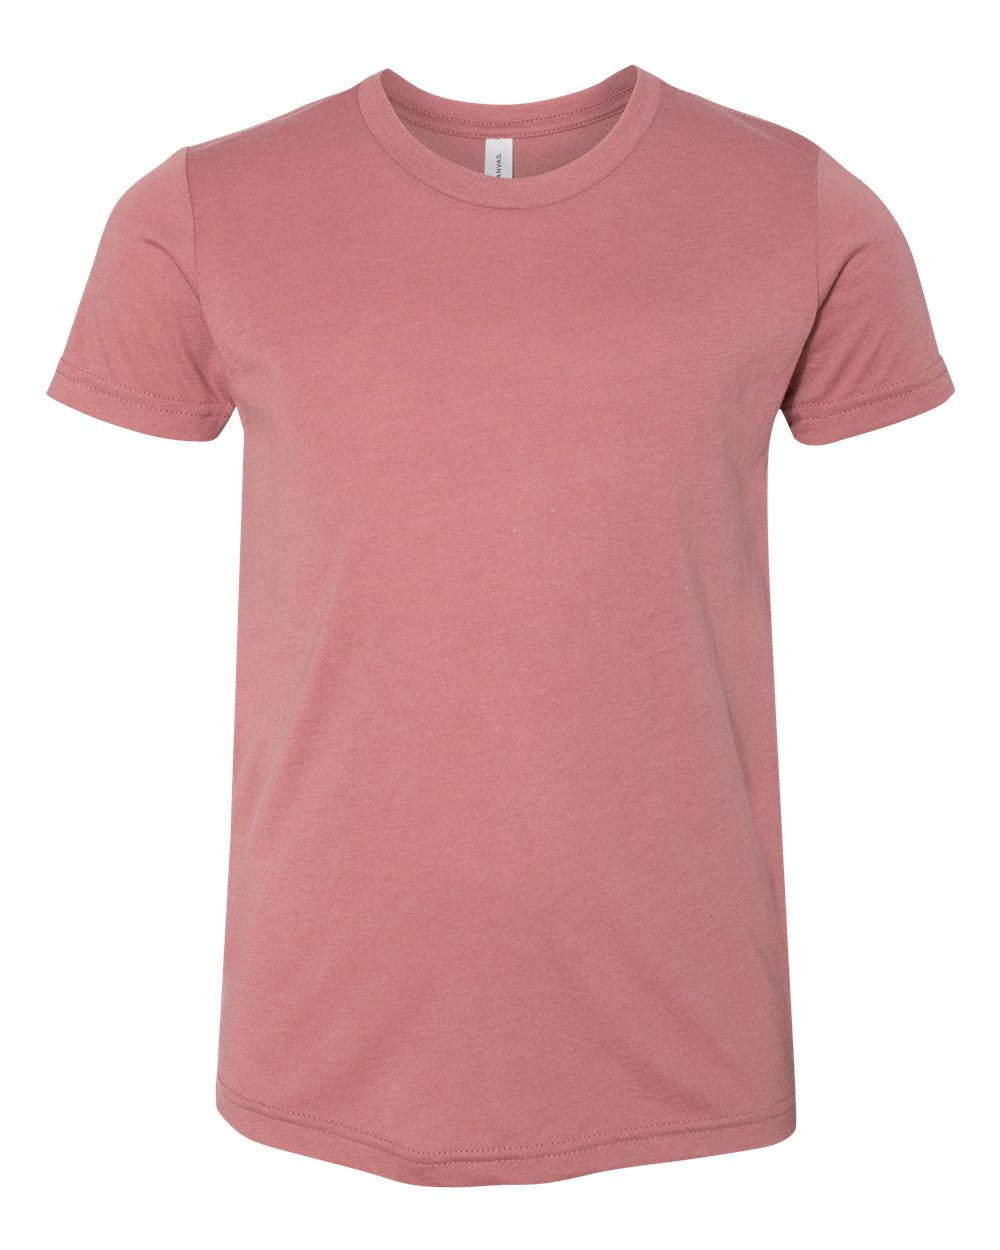 Bella + Canvas Youth Triblend Tee (3413y) in Mauve Triblend